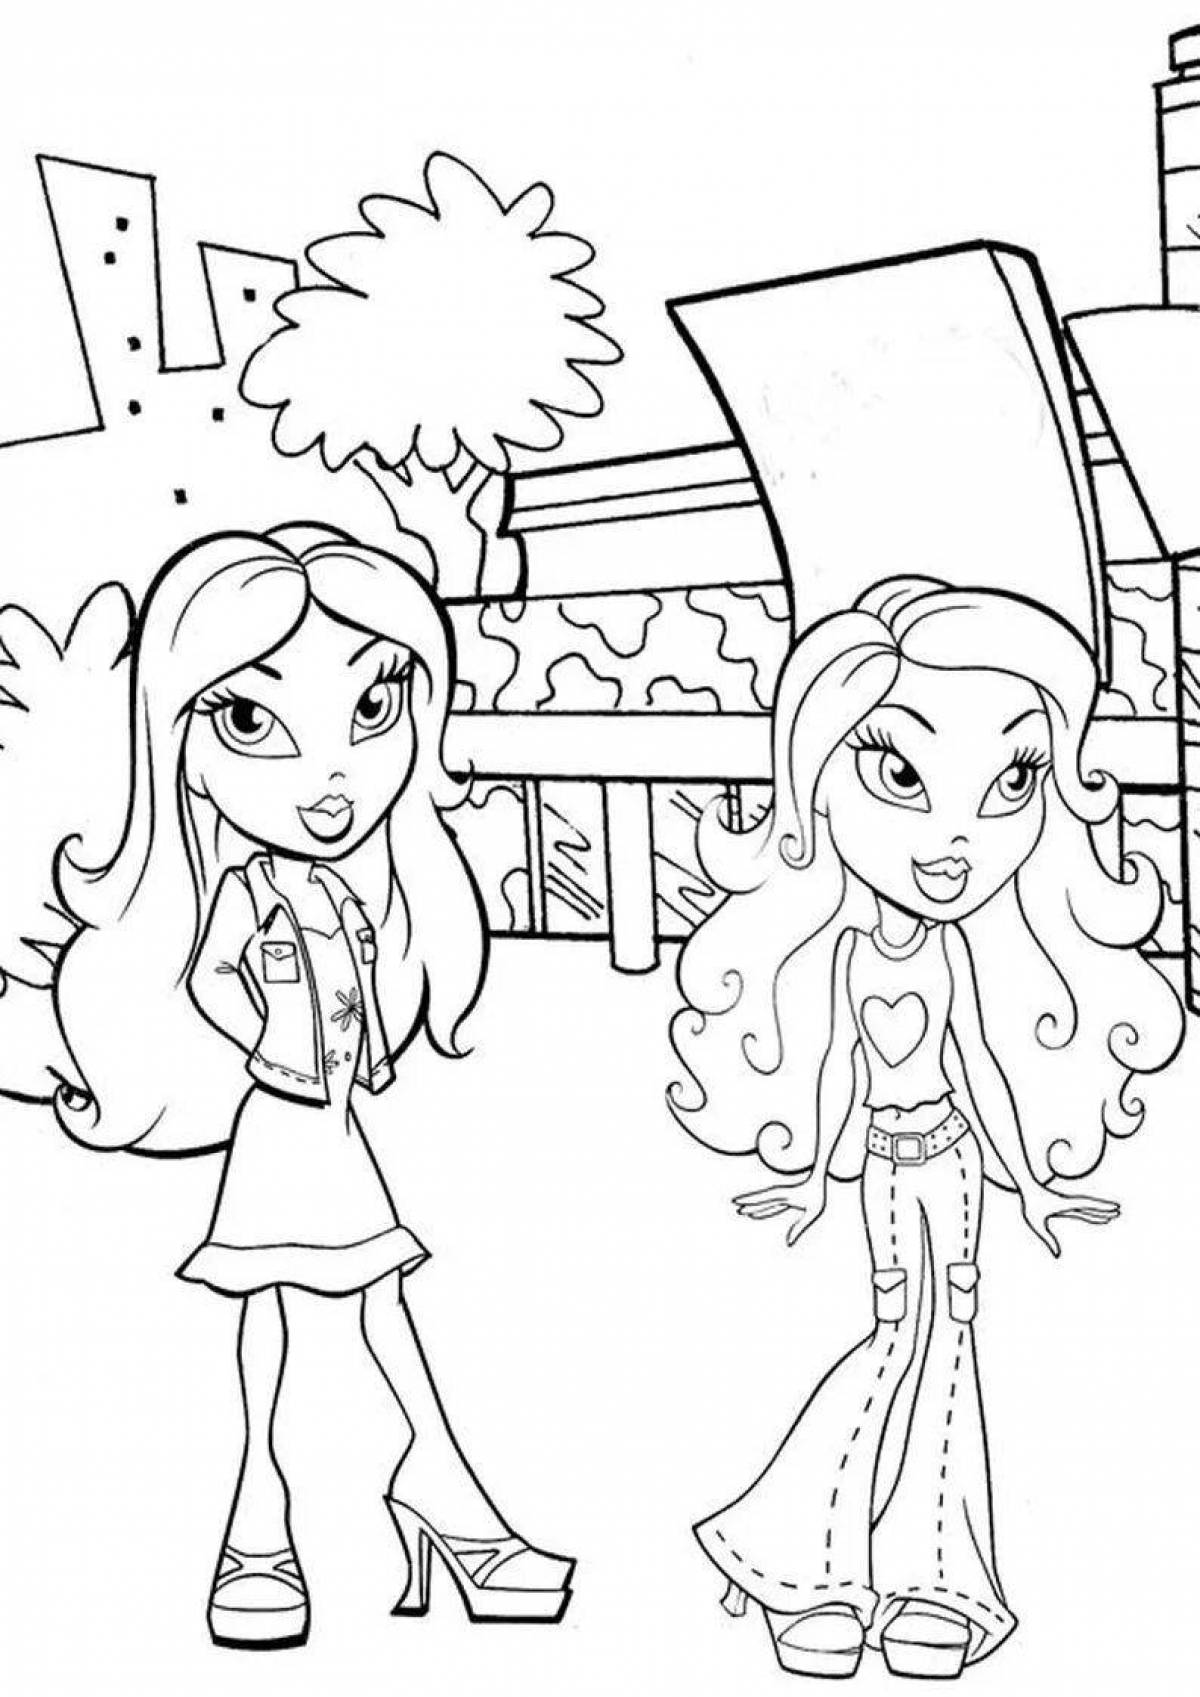 Vivacious coloring page bw for girls